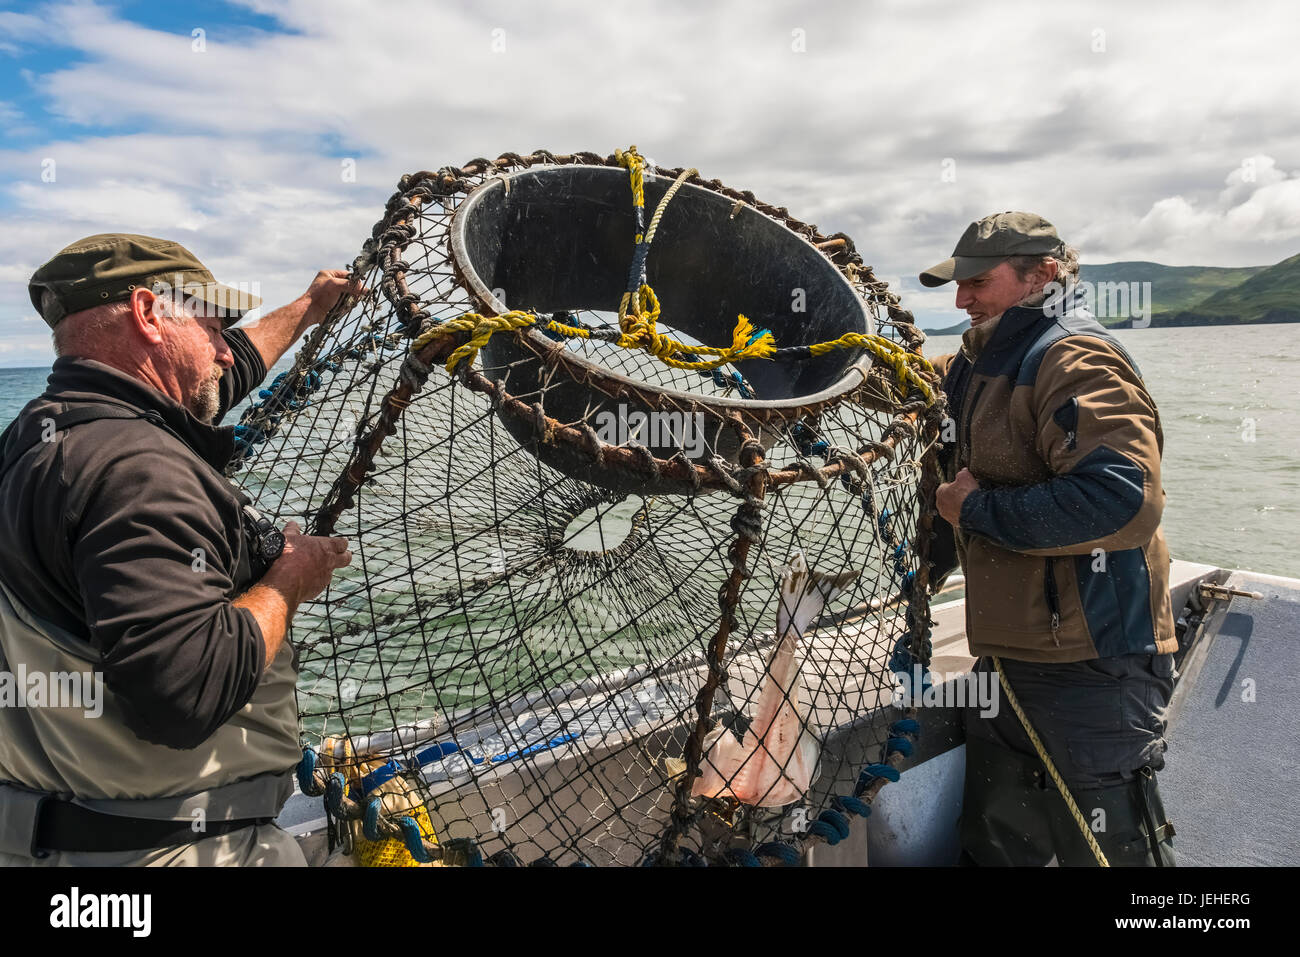 Two men prepare to drop a crab pot baited with halibut in the Cook Inlet near Kukak Bay, Katmai National Park & Preserve, Southwest Alaska, USA Stock Photo